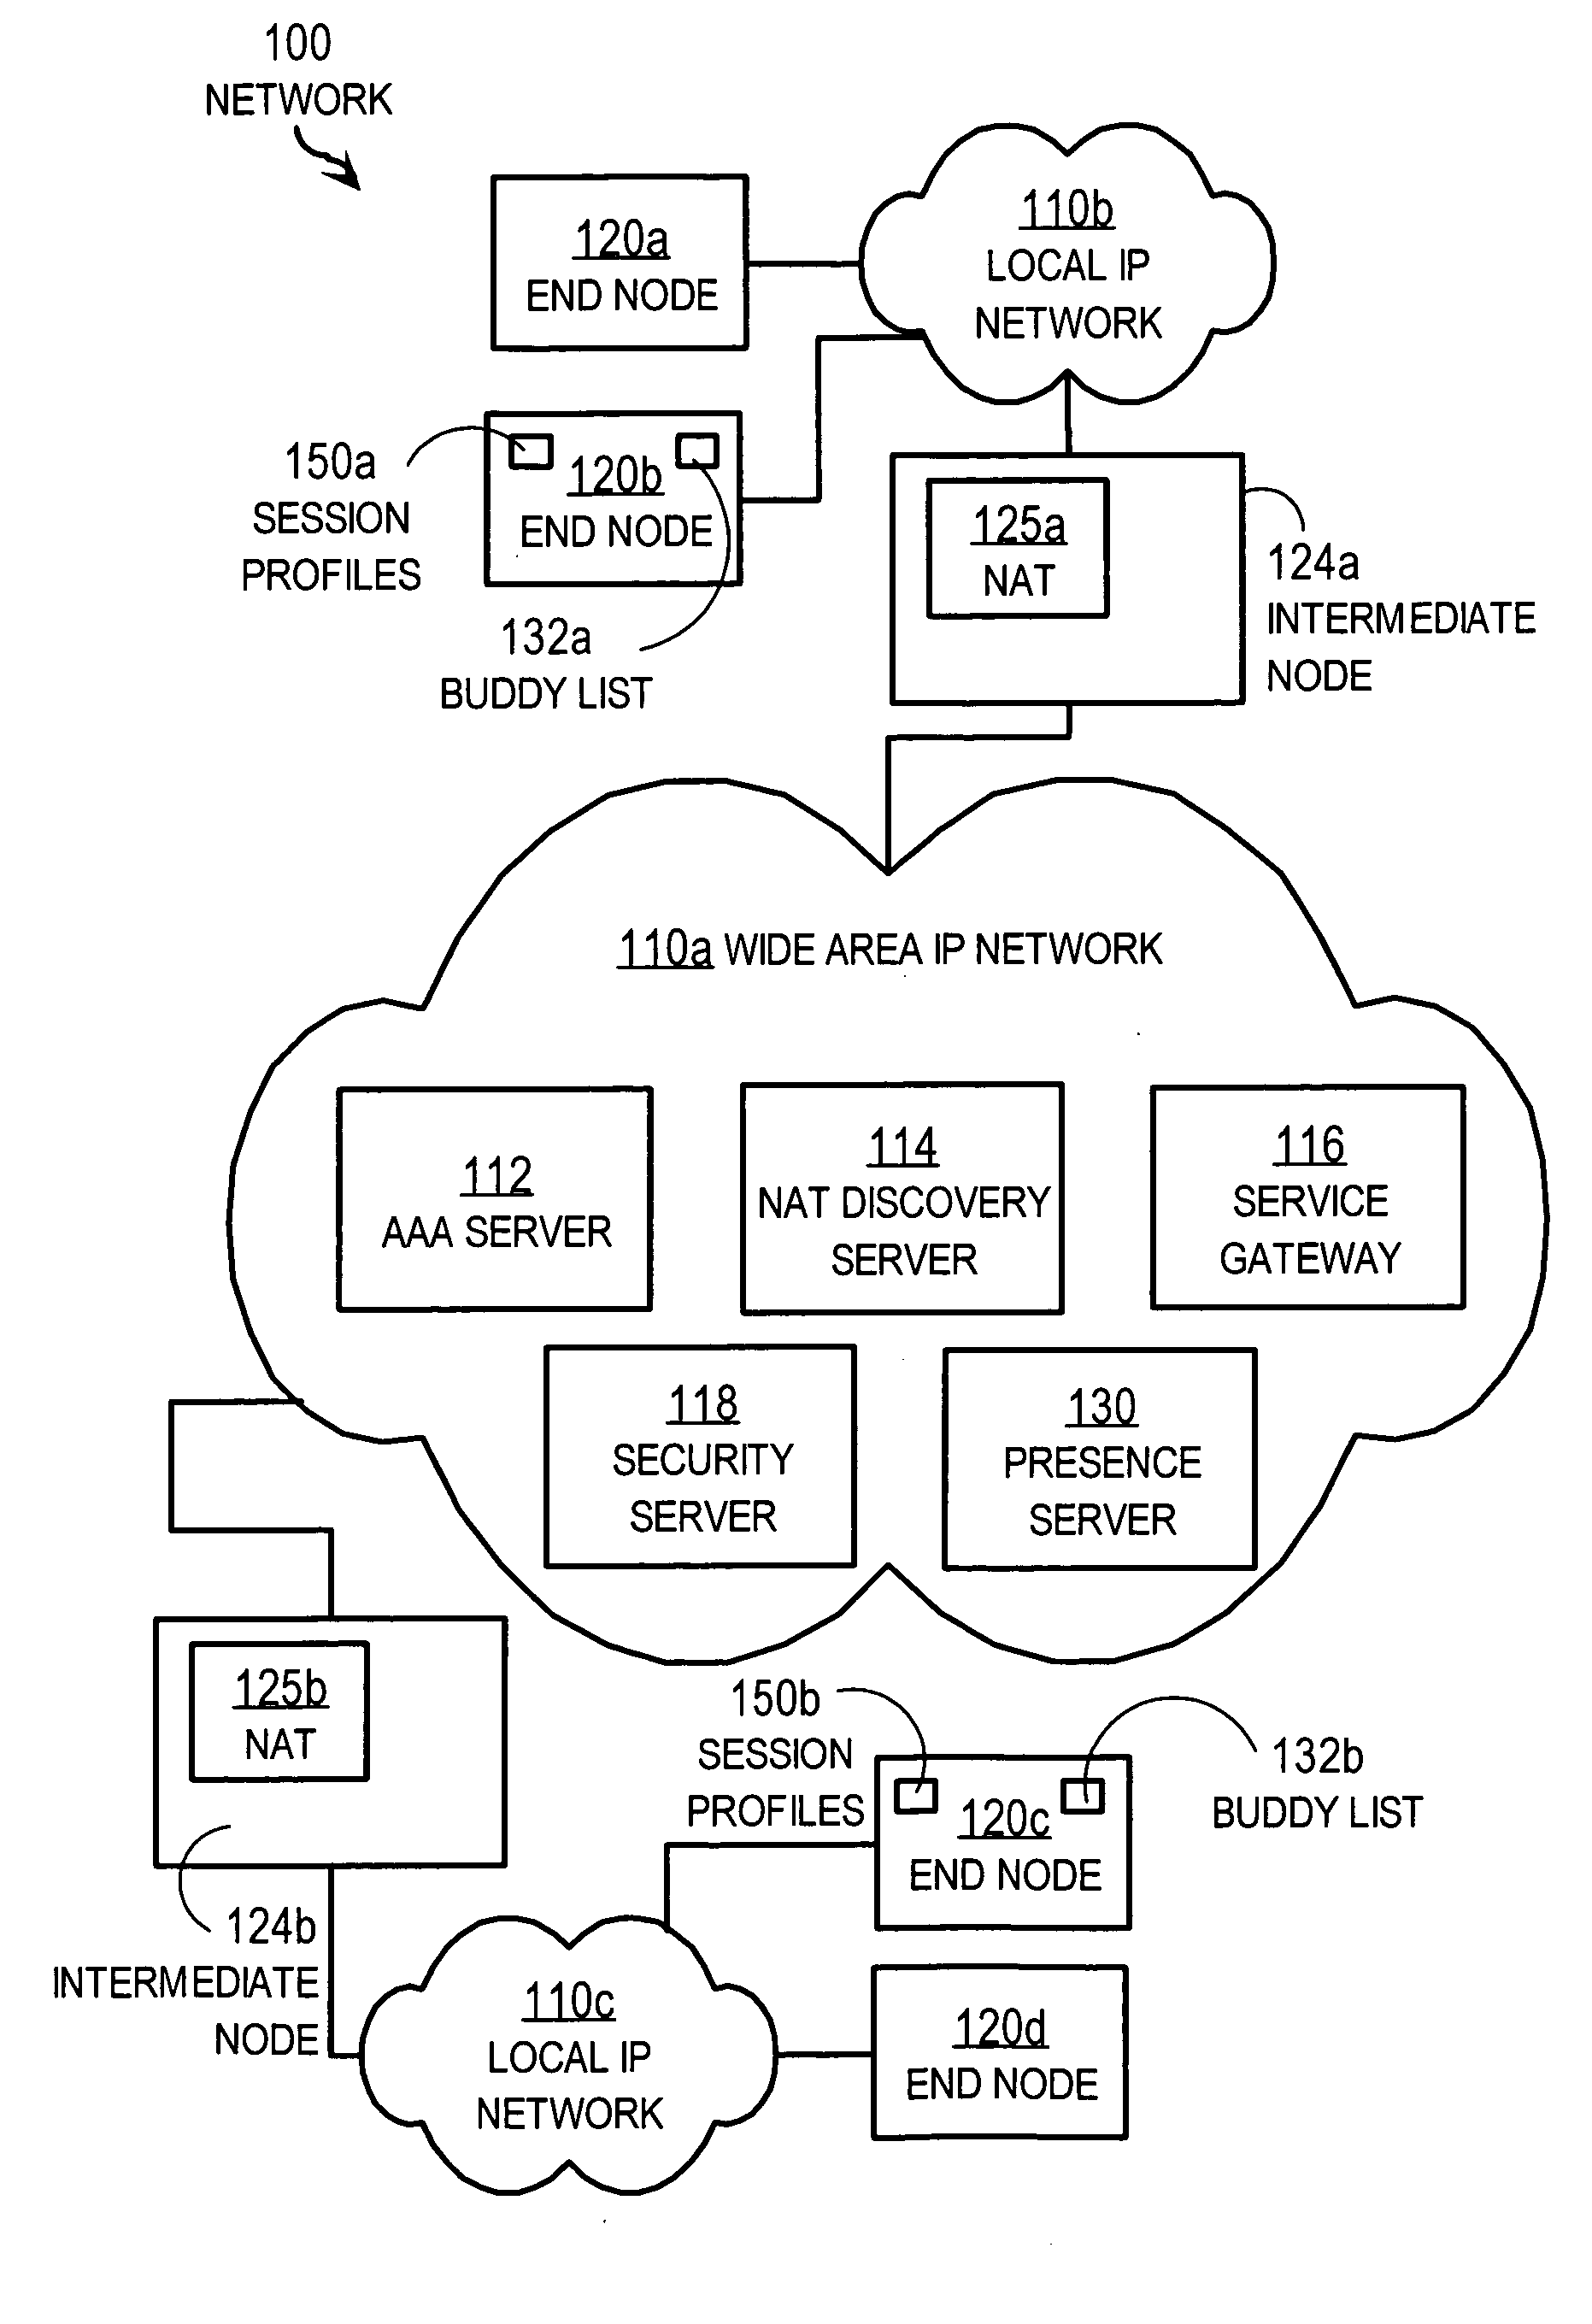 Techniques for reducing session set-up for real-time communications over a network